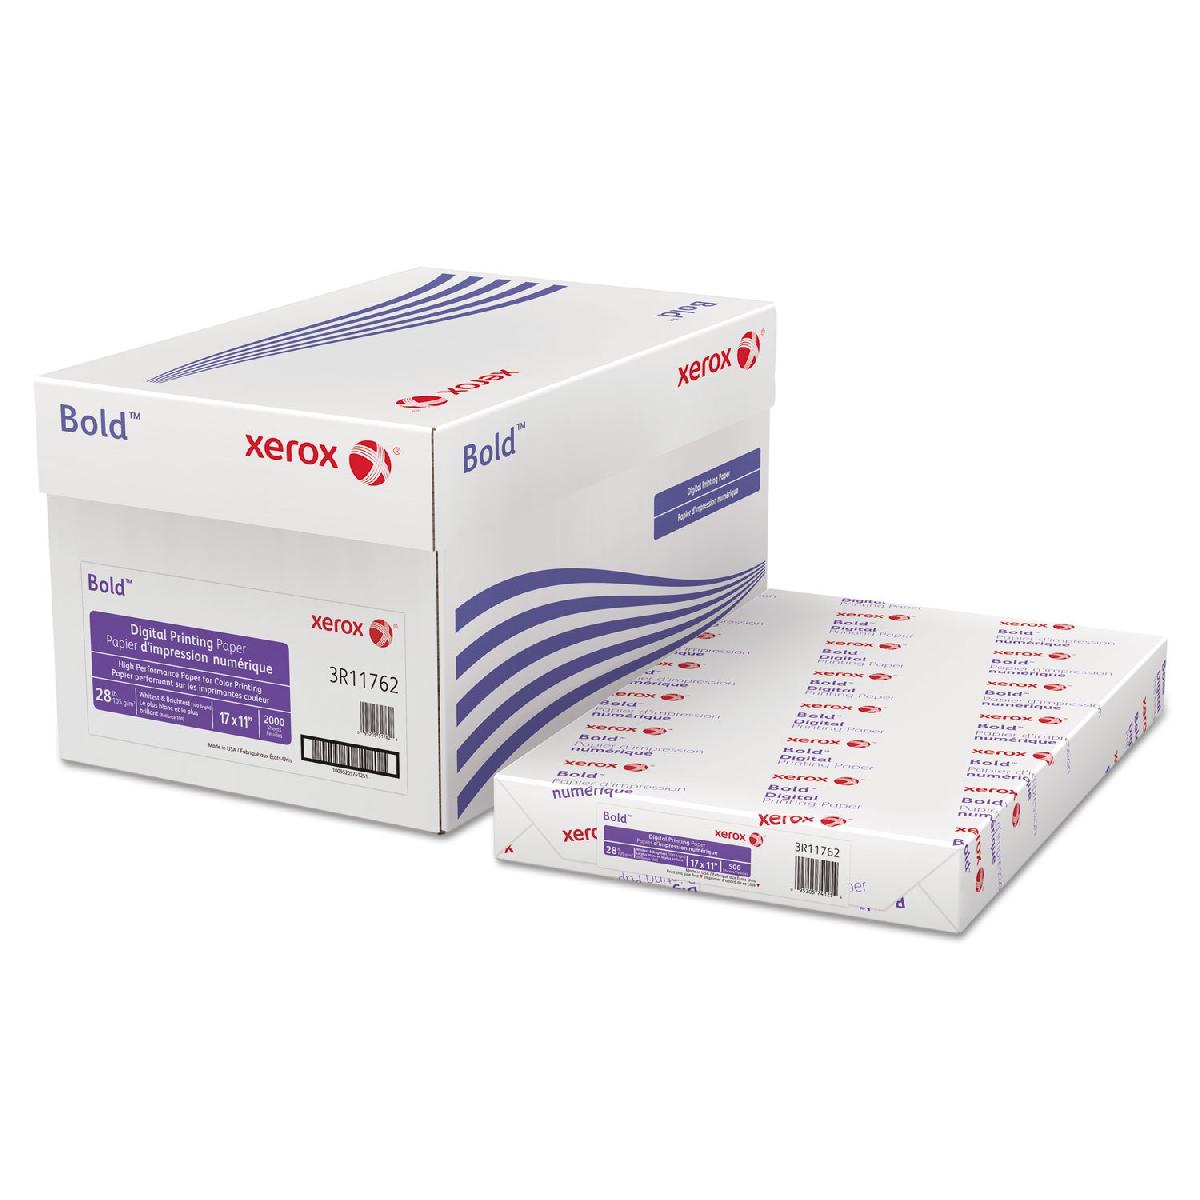 Xerox® Bold Digital™ Printing Paper Blue White 28 lb. Smooth Text 105 gsm 100 Brightness 11x17 in. 500 Sheets per Ream - Email or call for Bulk Orders!